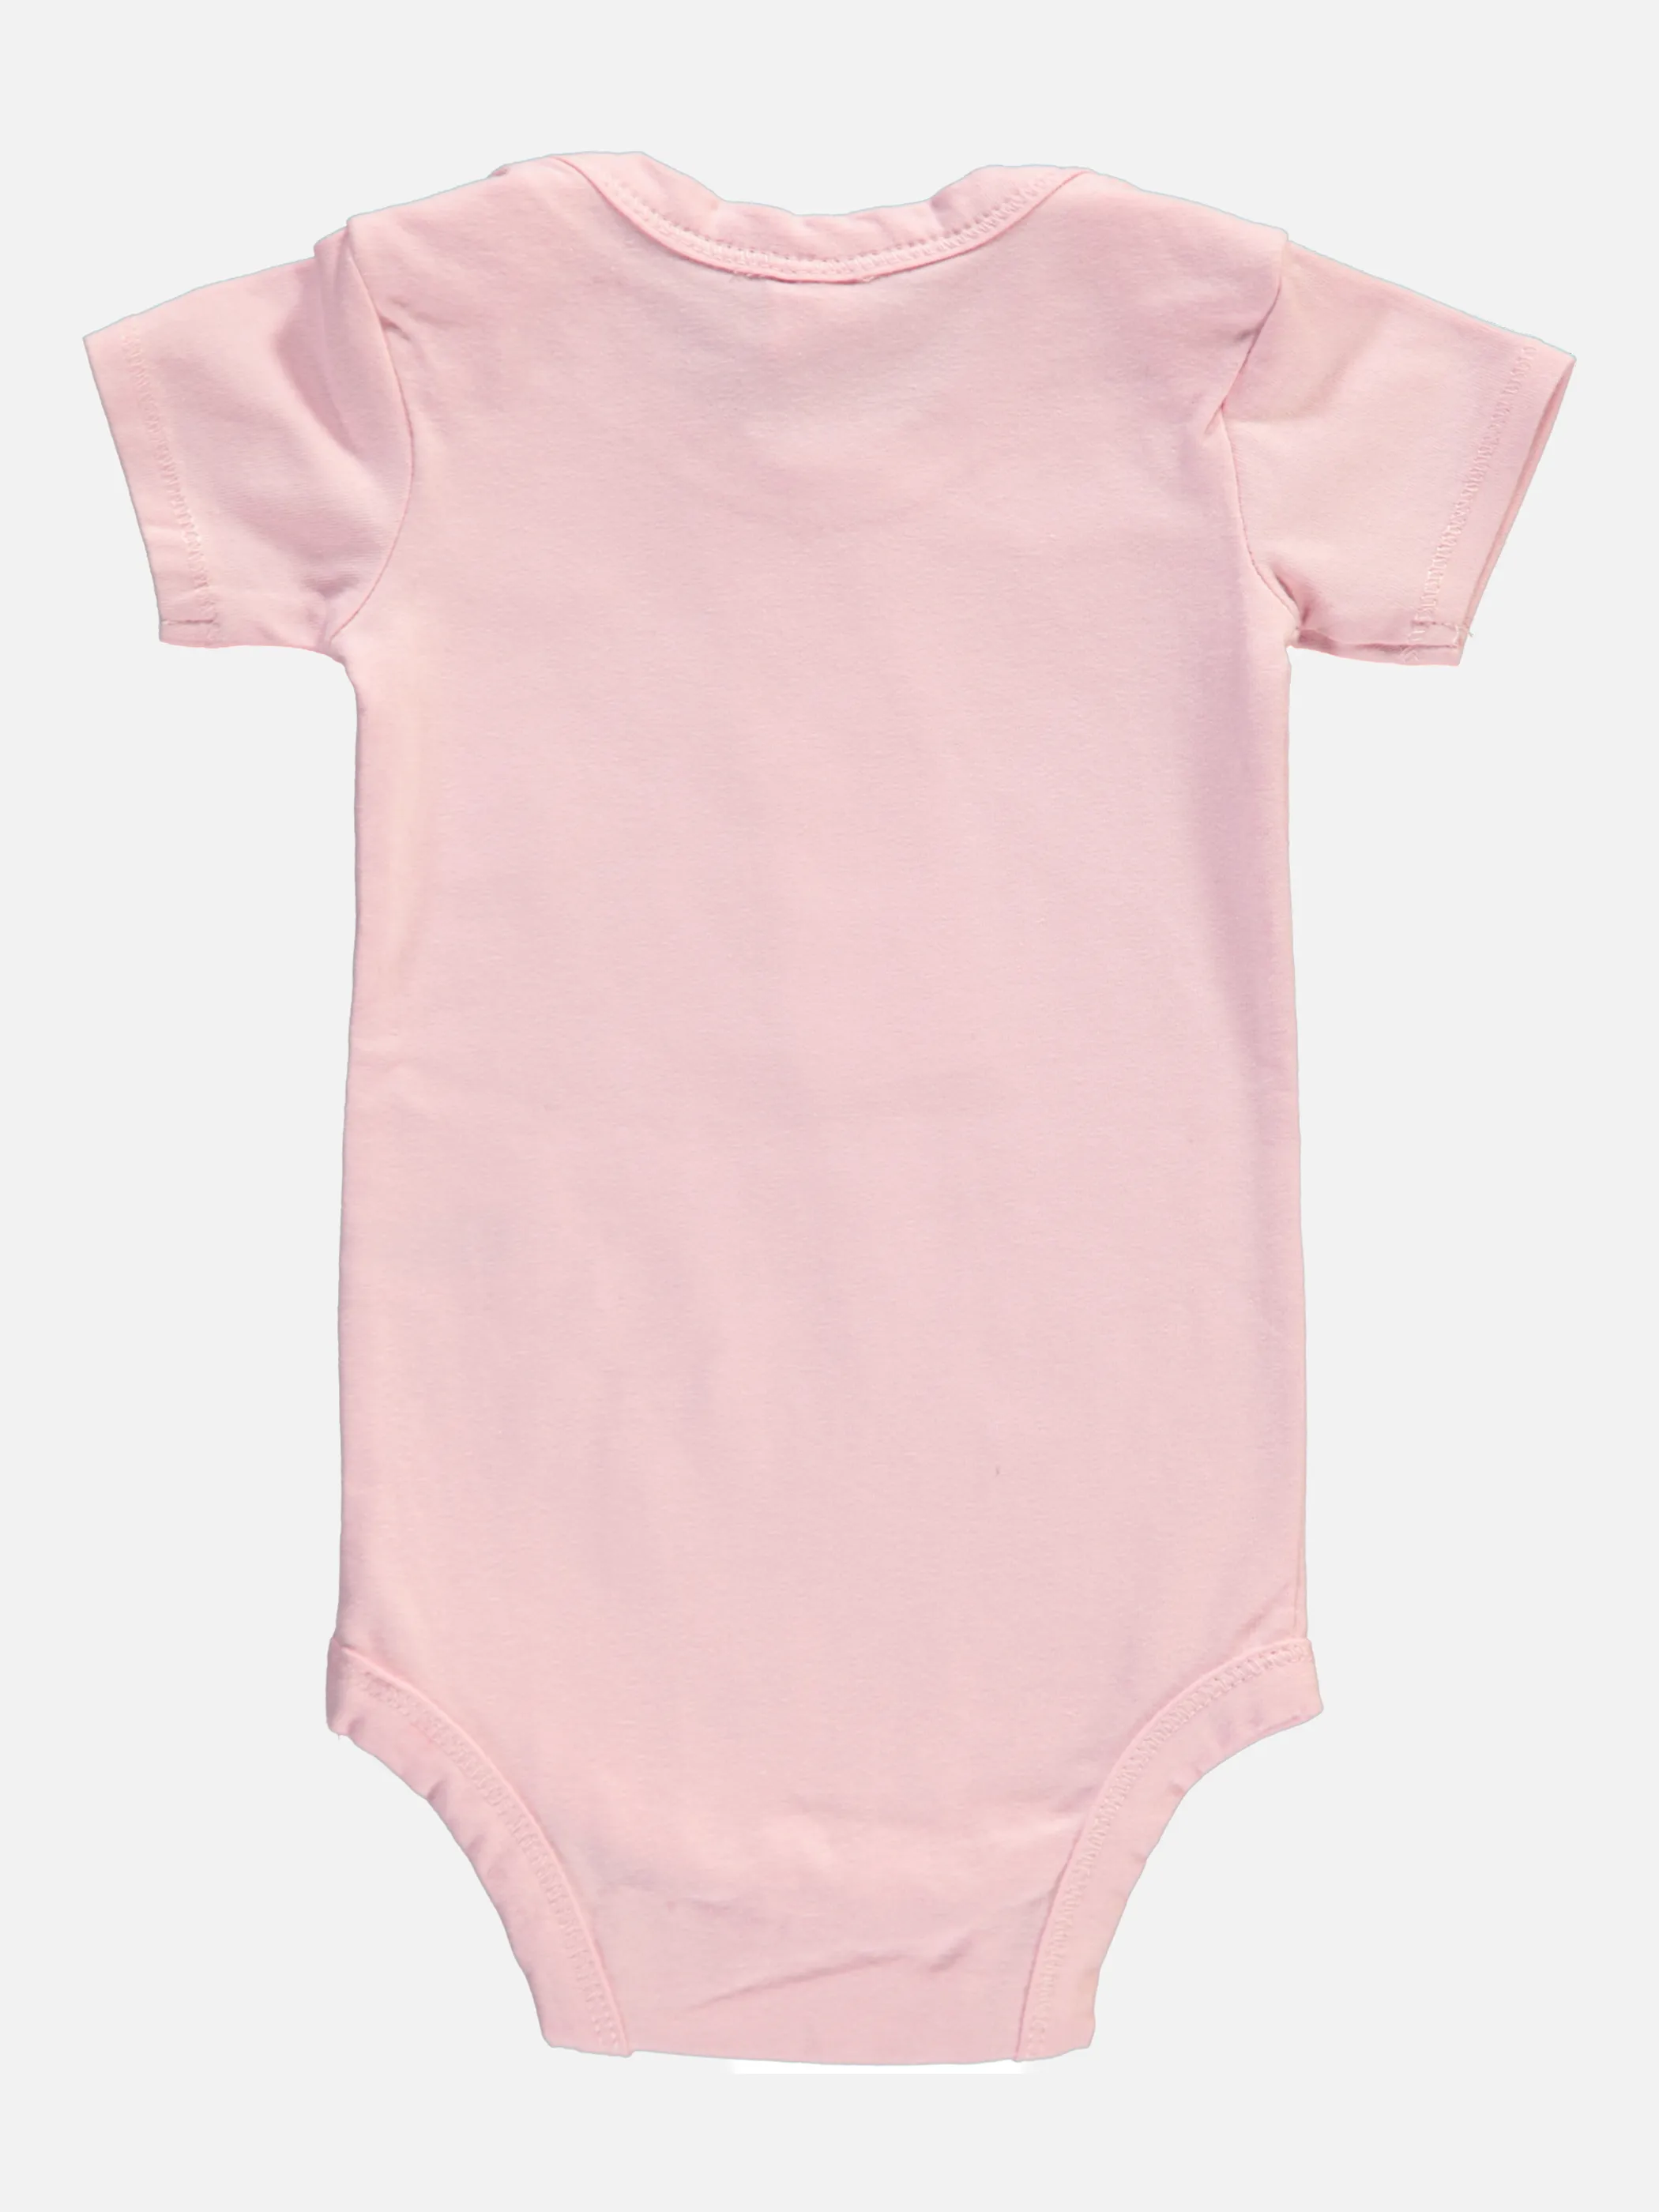 Roly Baby Body 1/4 Arm Pink 846837 48 LT PINK 2